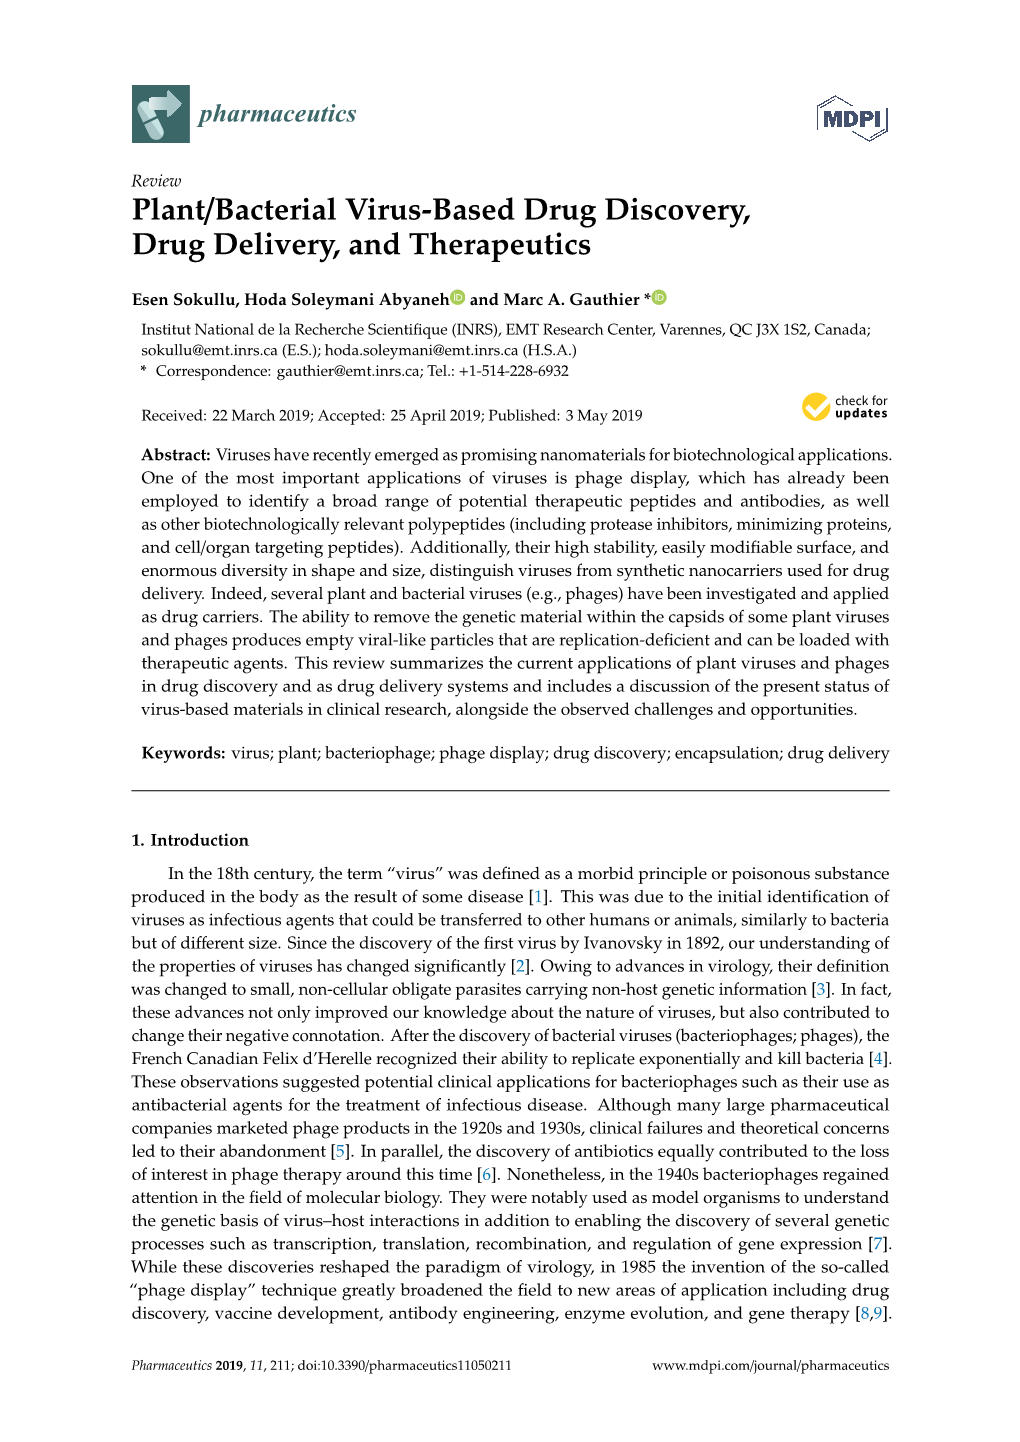 Plant/Bacterial Virus-Based Drug Discovery, Drug Delivery, and Therapeutics